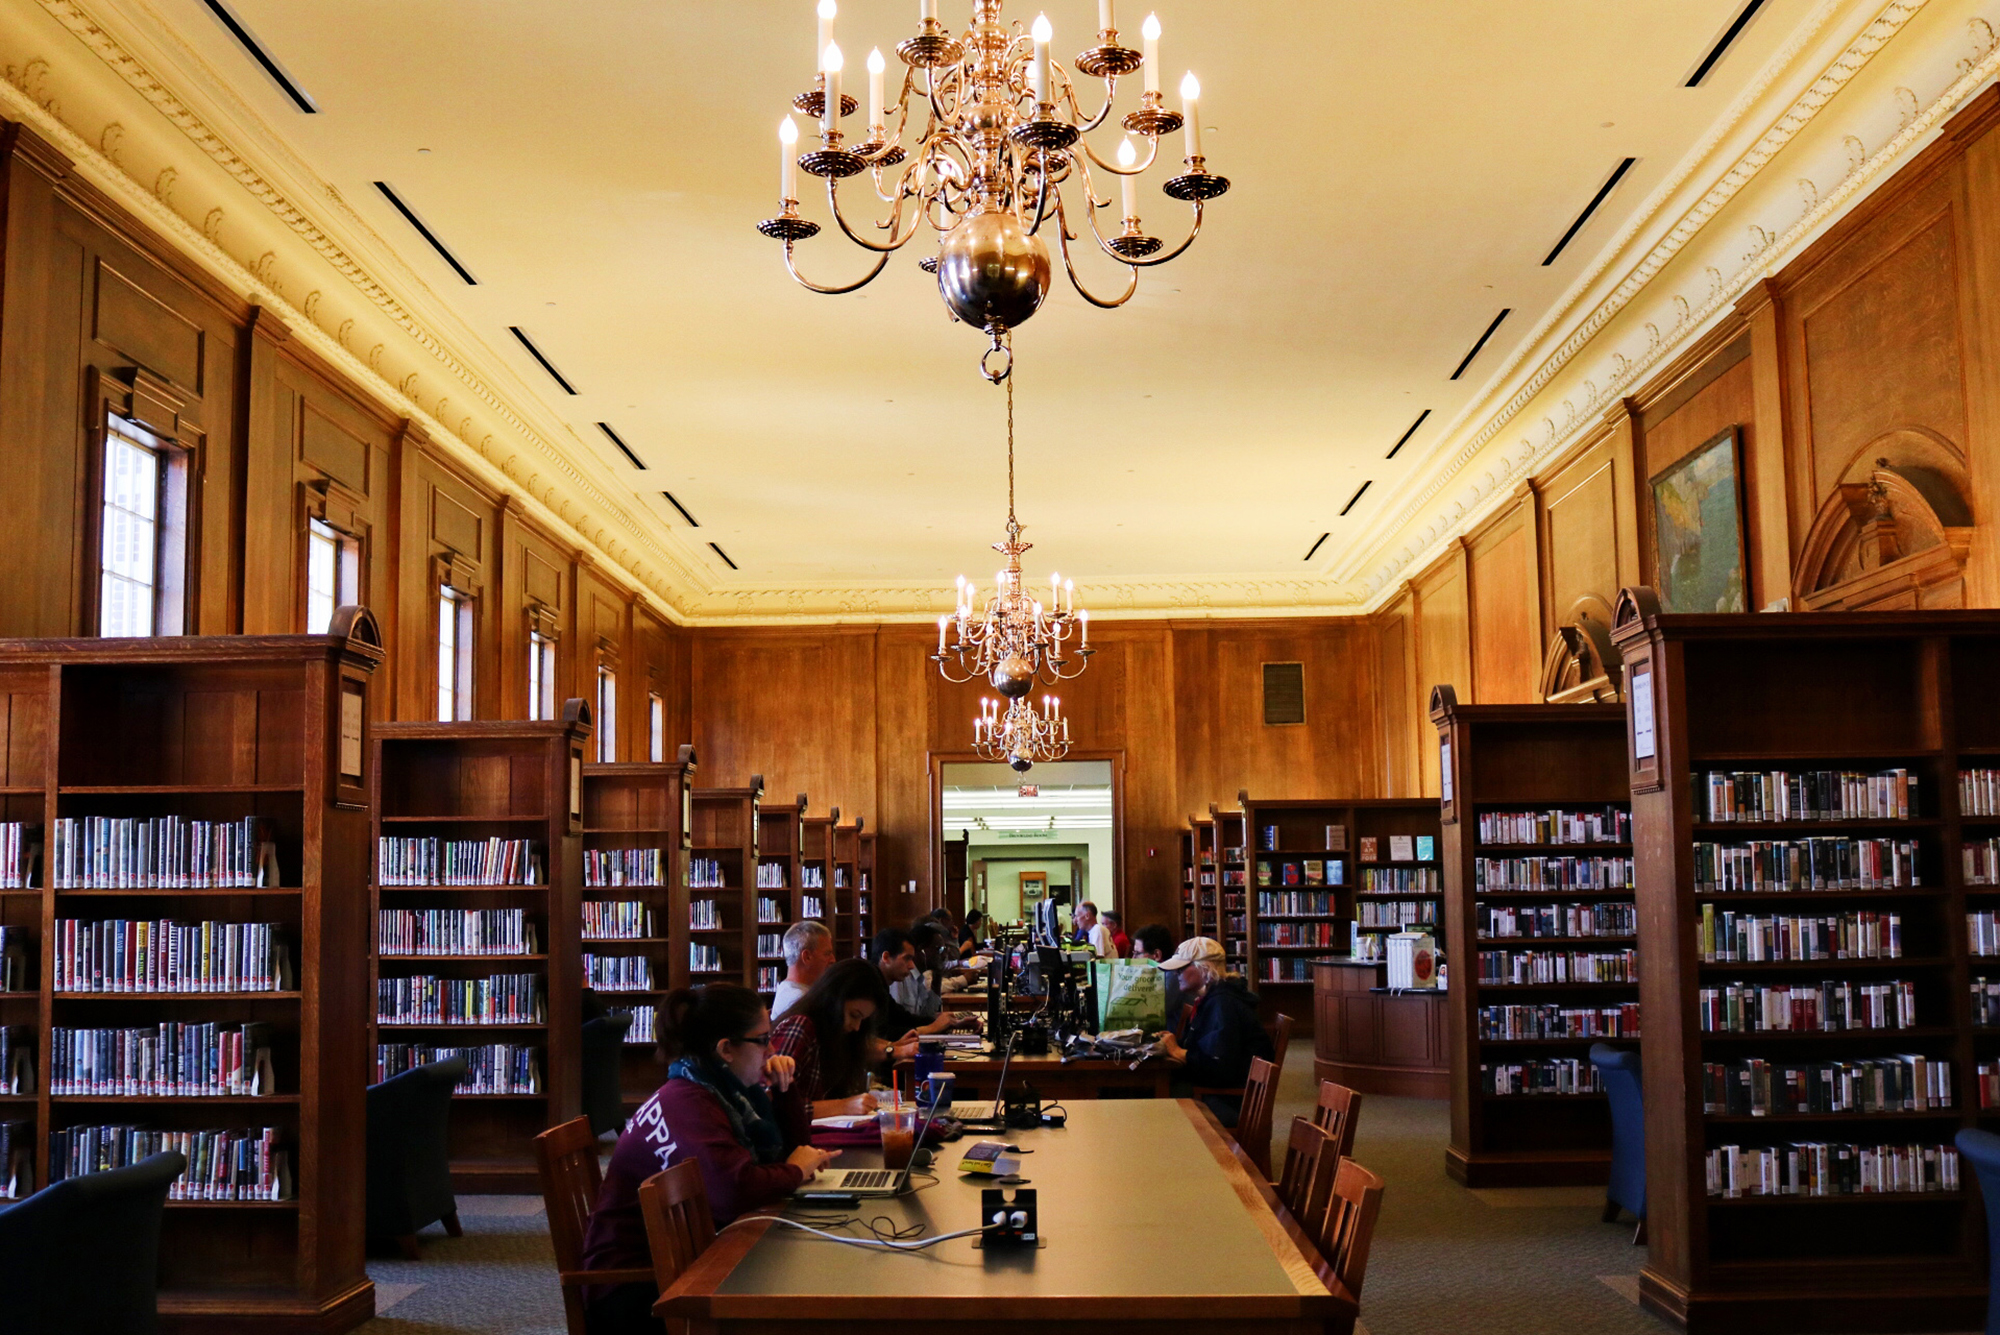 Photo: Interior view of the Brookline Public Library.